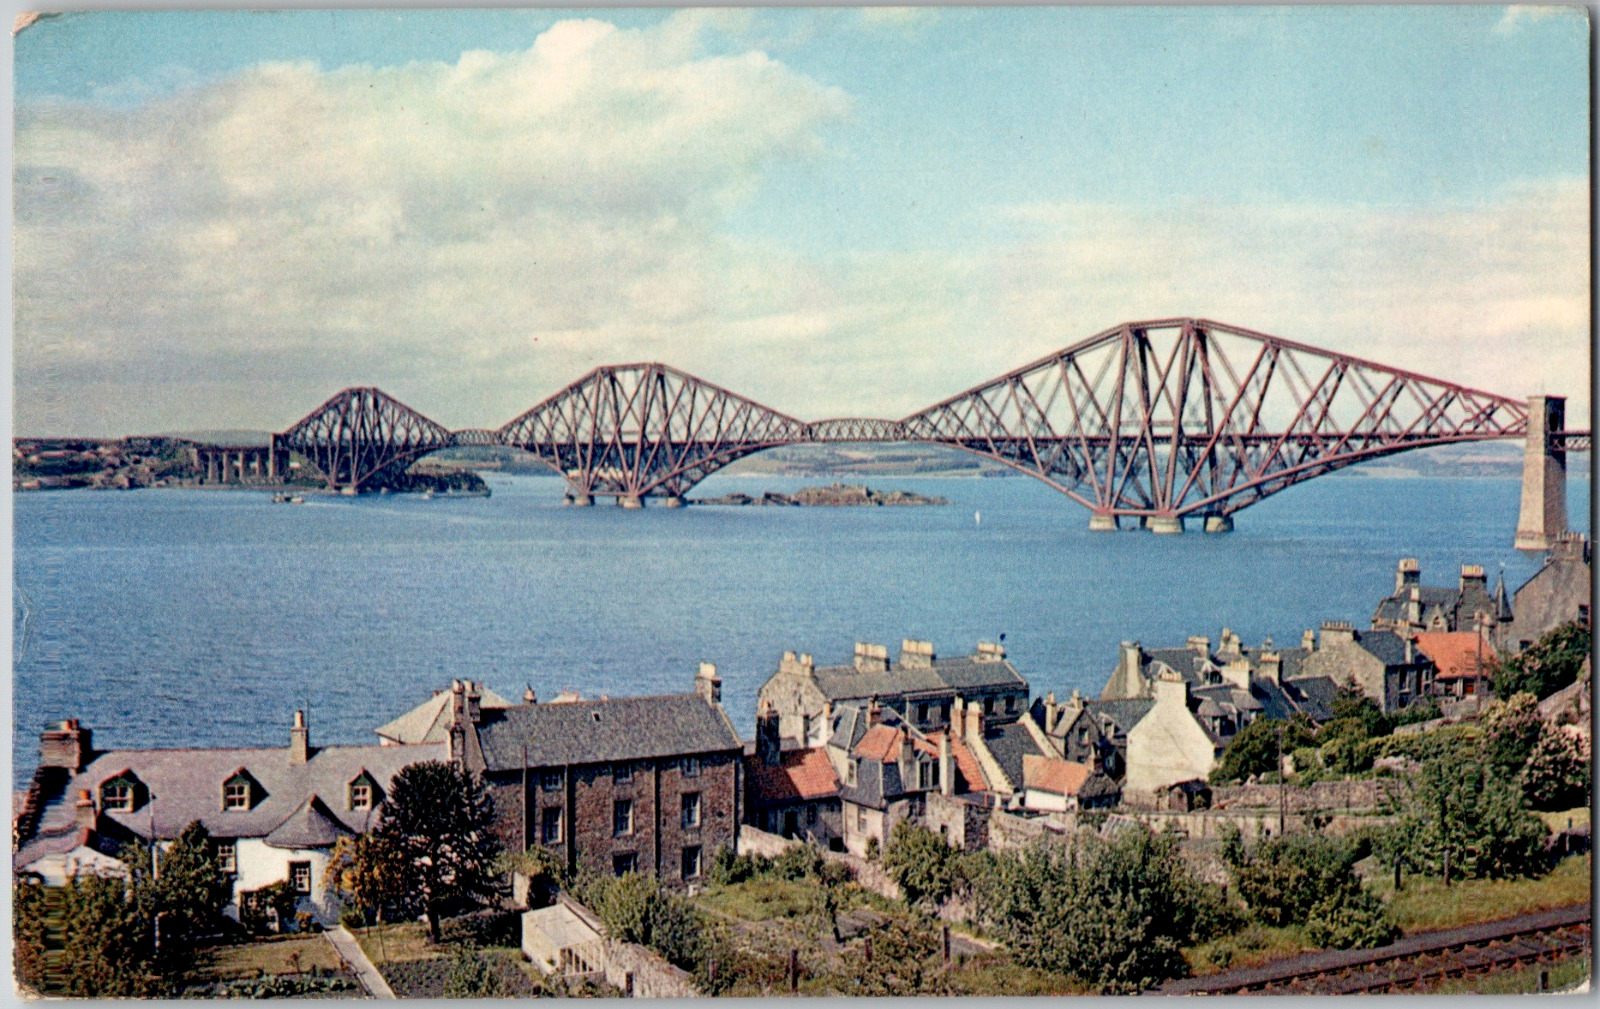 South Queensferry Scotland Forth Bridge Firth Of Forth River Vintage Postcard